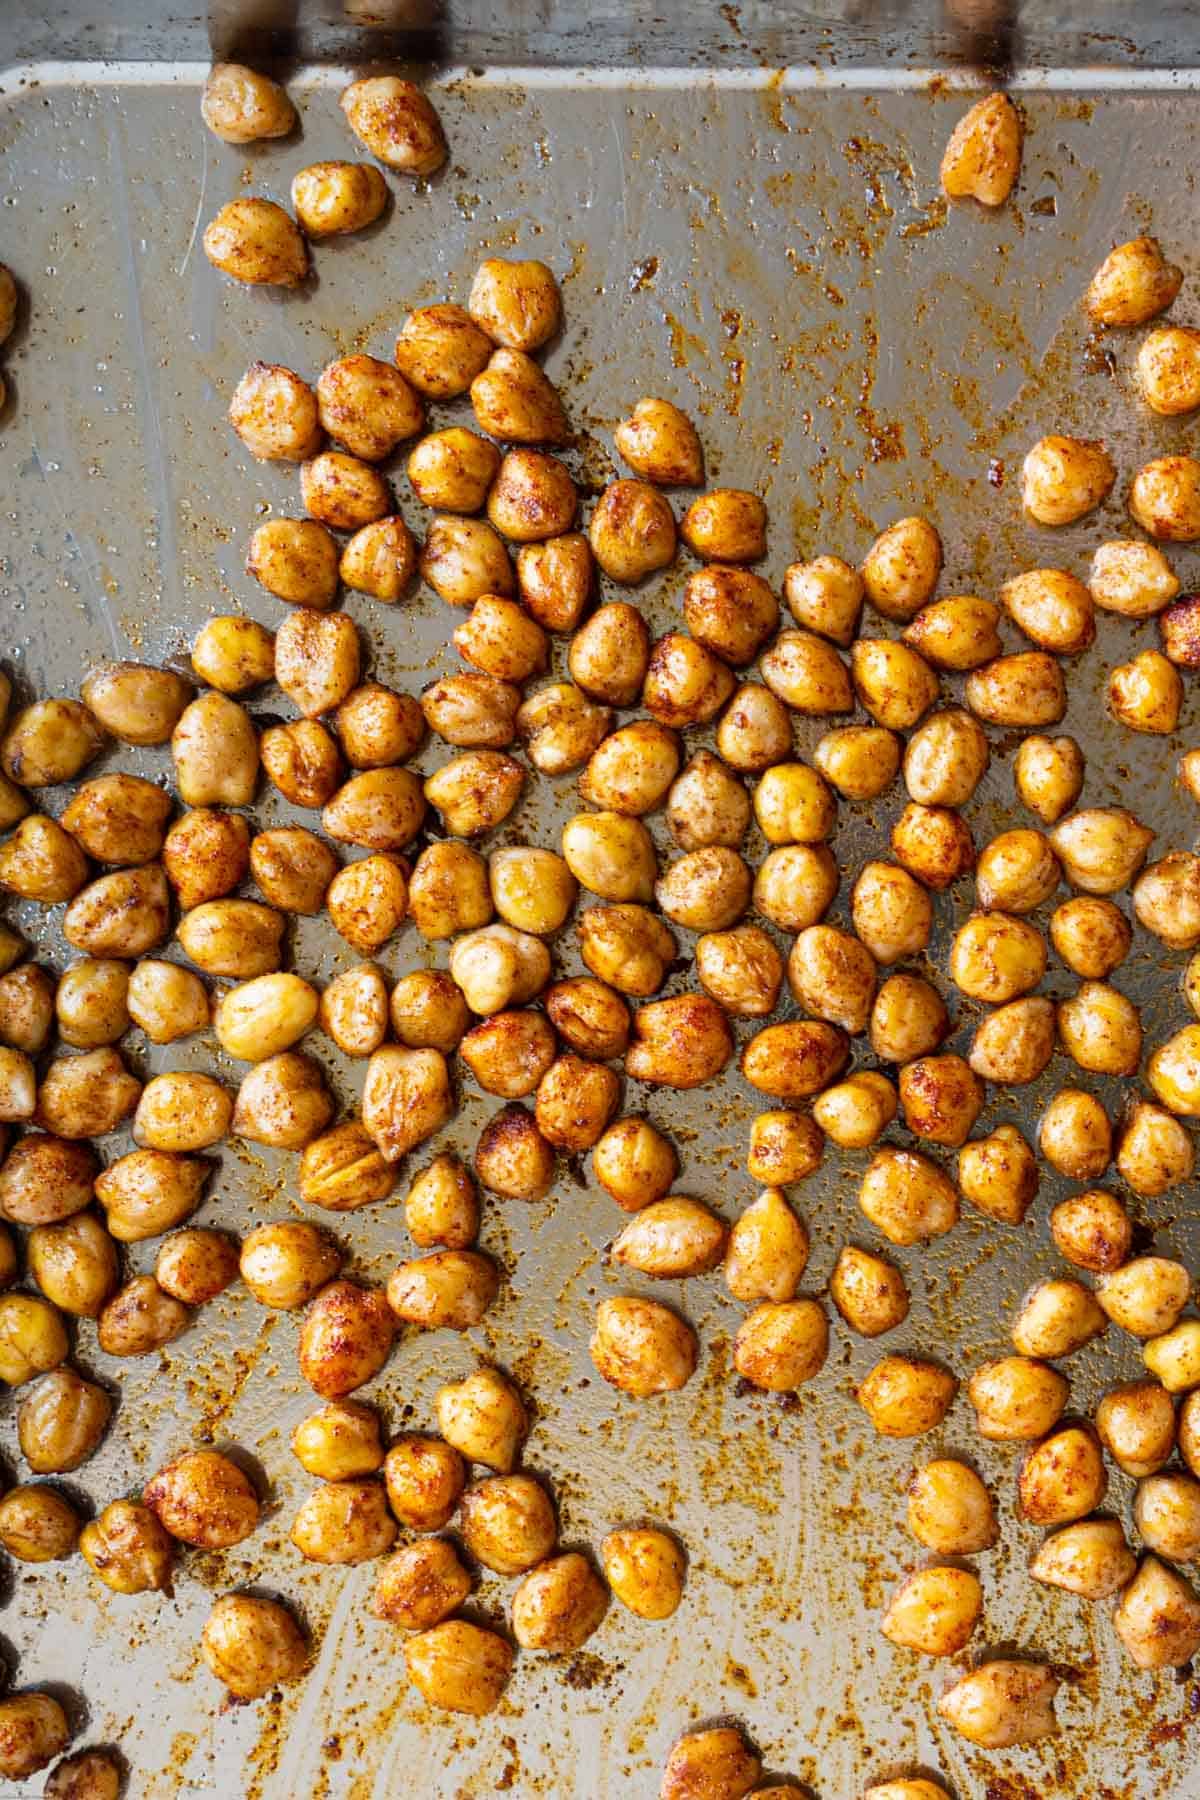 Crispy roasted chickpeas in five spice powder and olive oil on a stainless steel rimmed baking sheet.